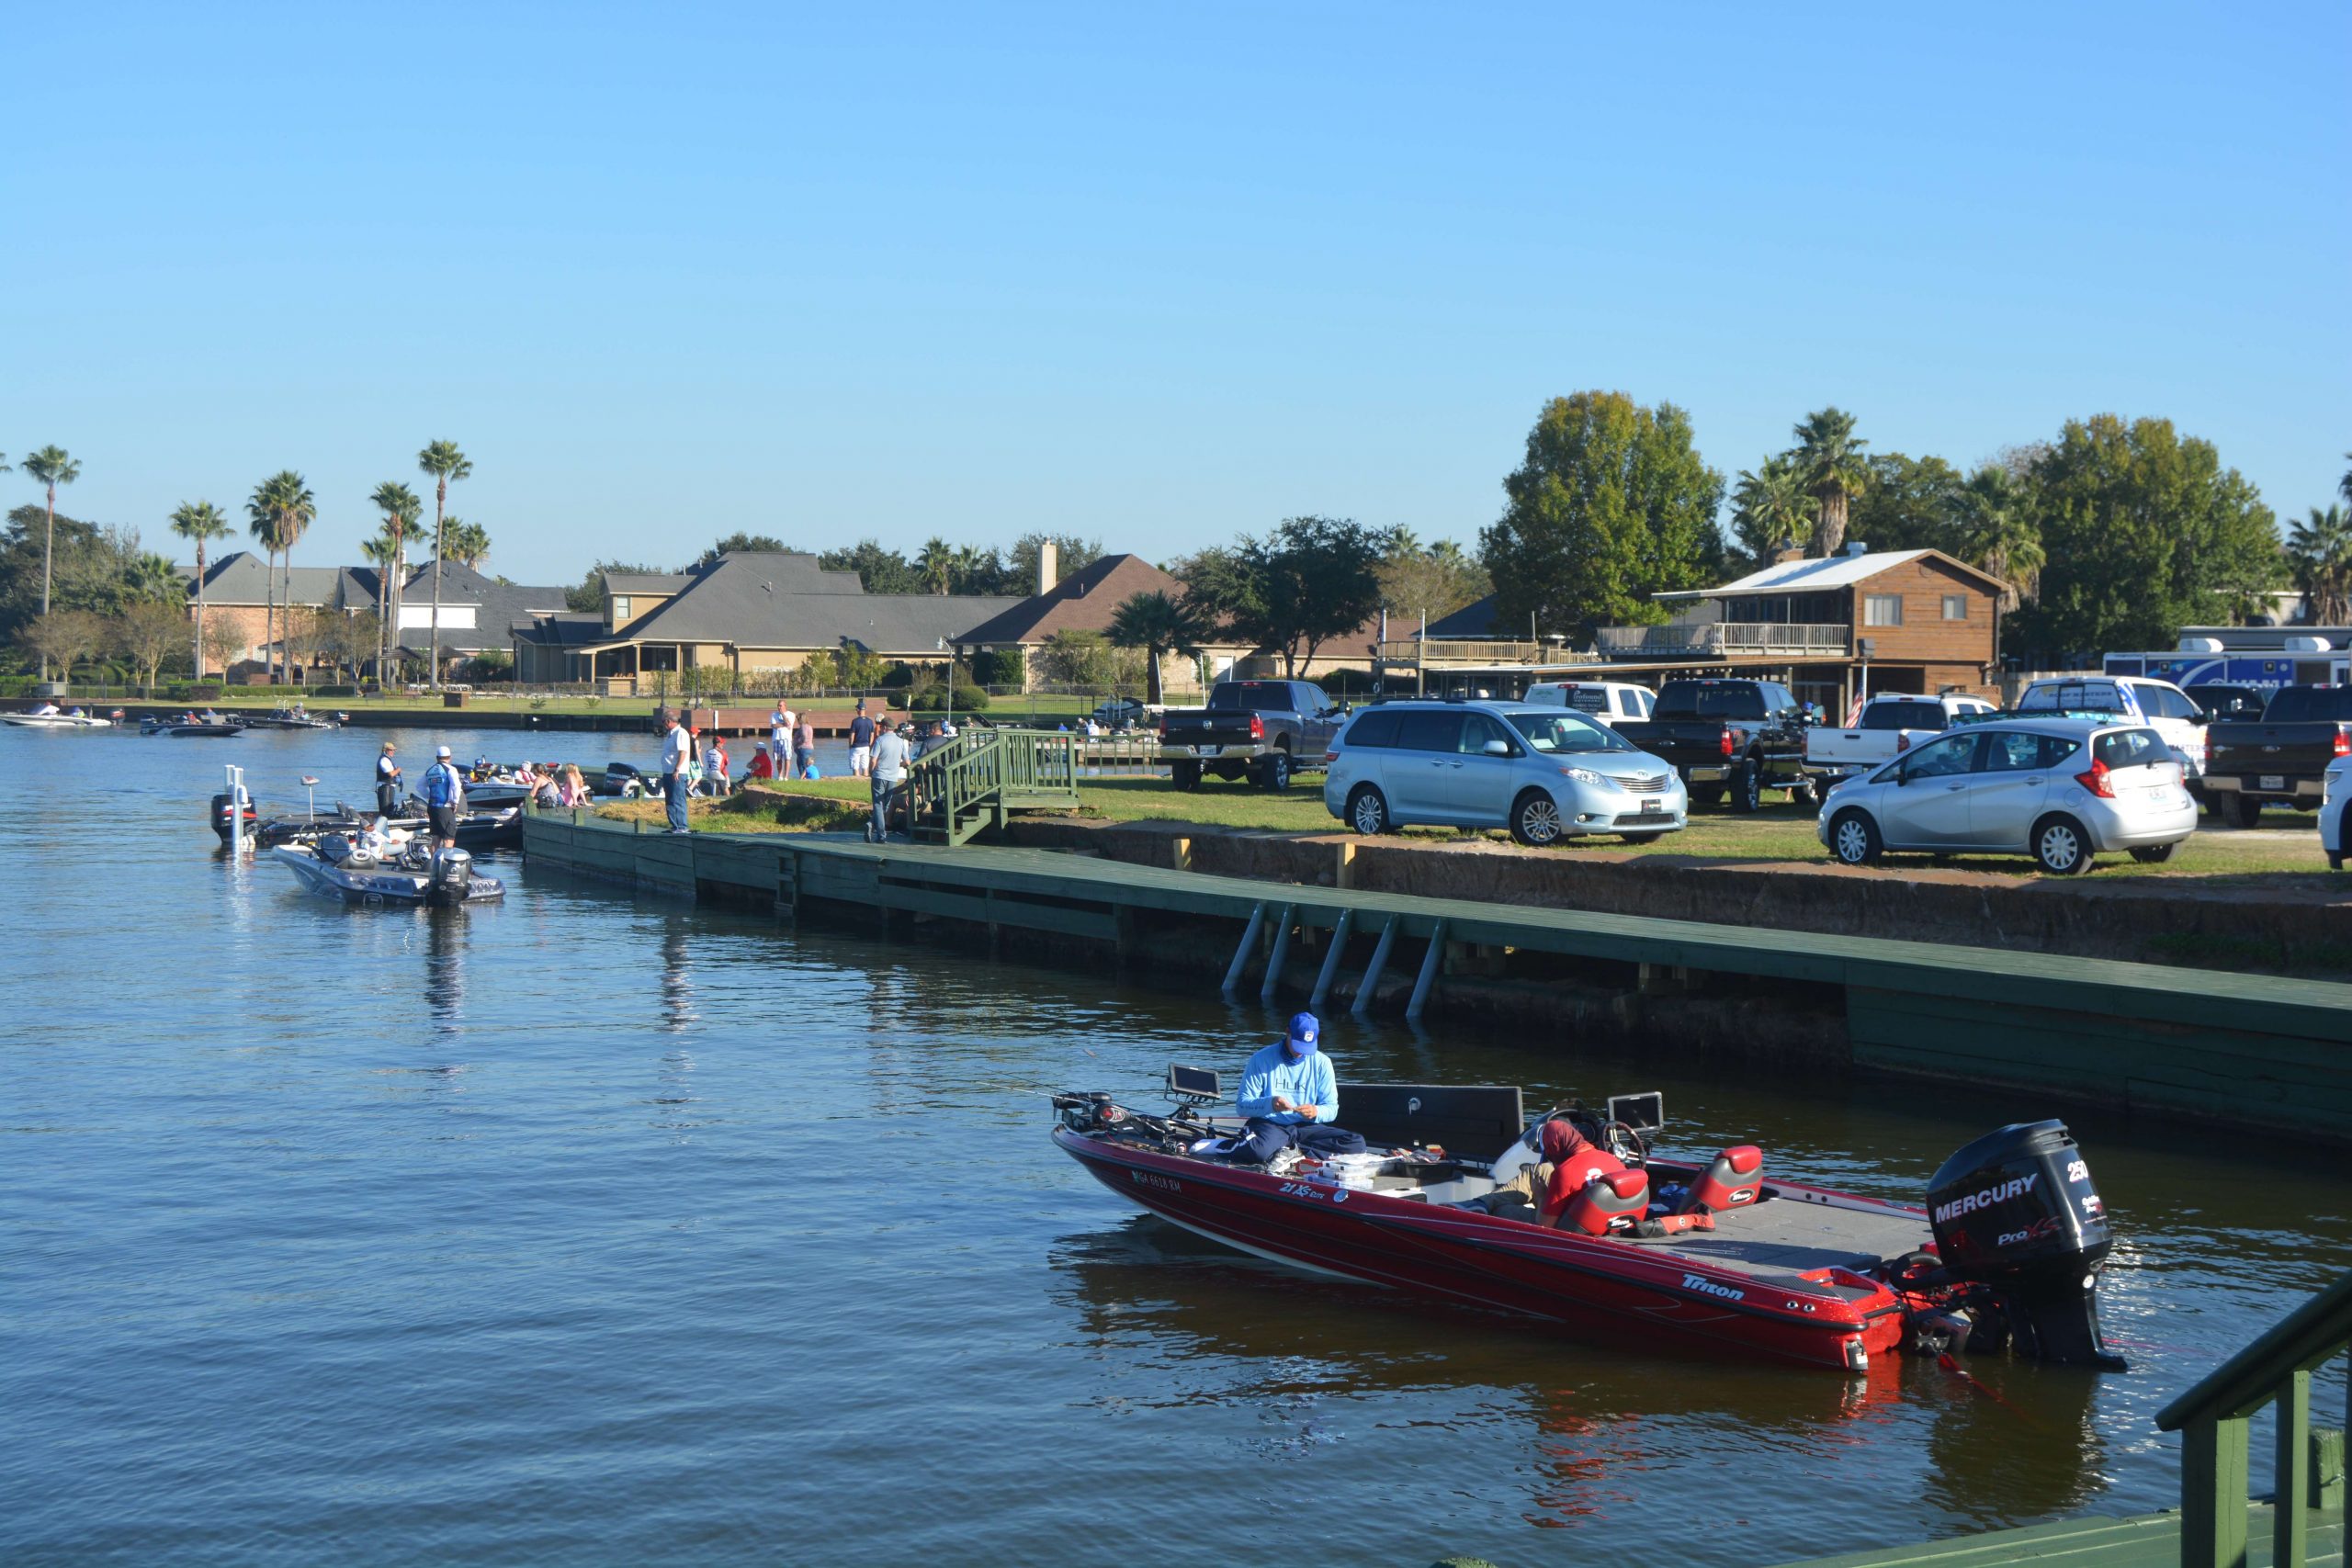 The parking lot is full as the last boats come in.